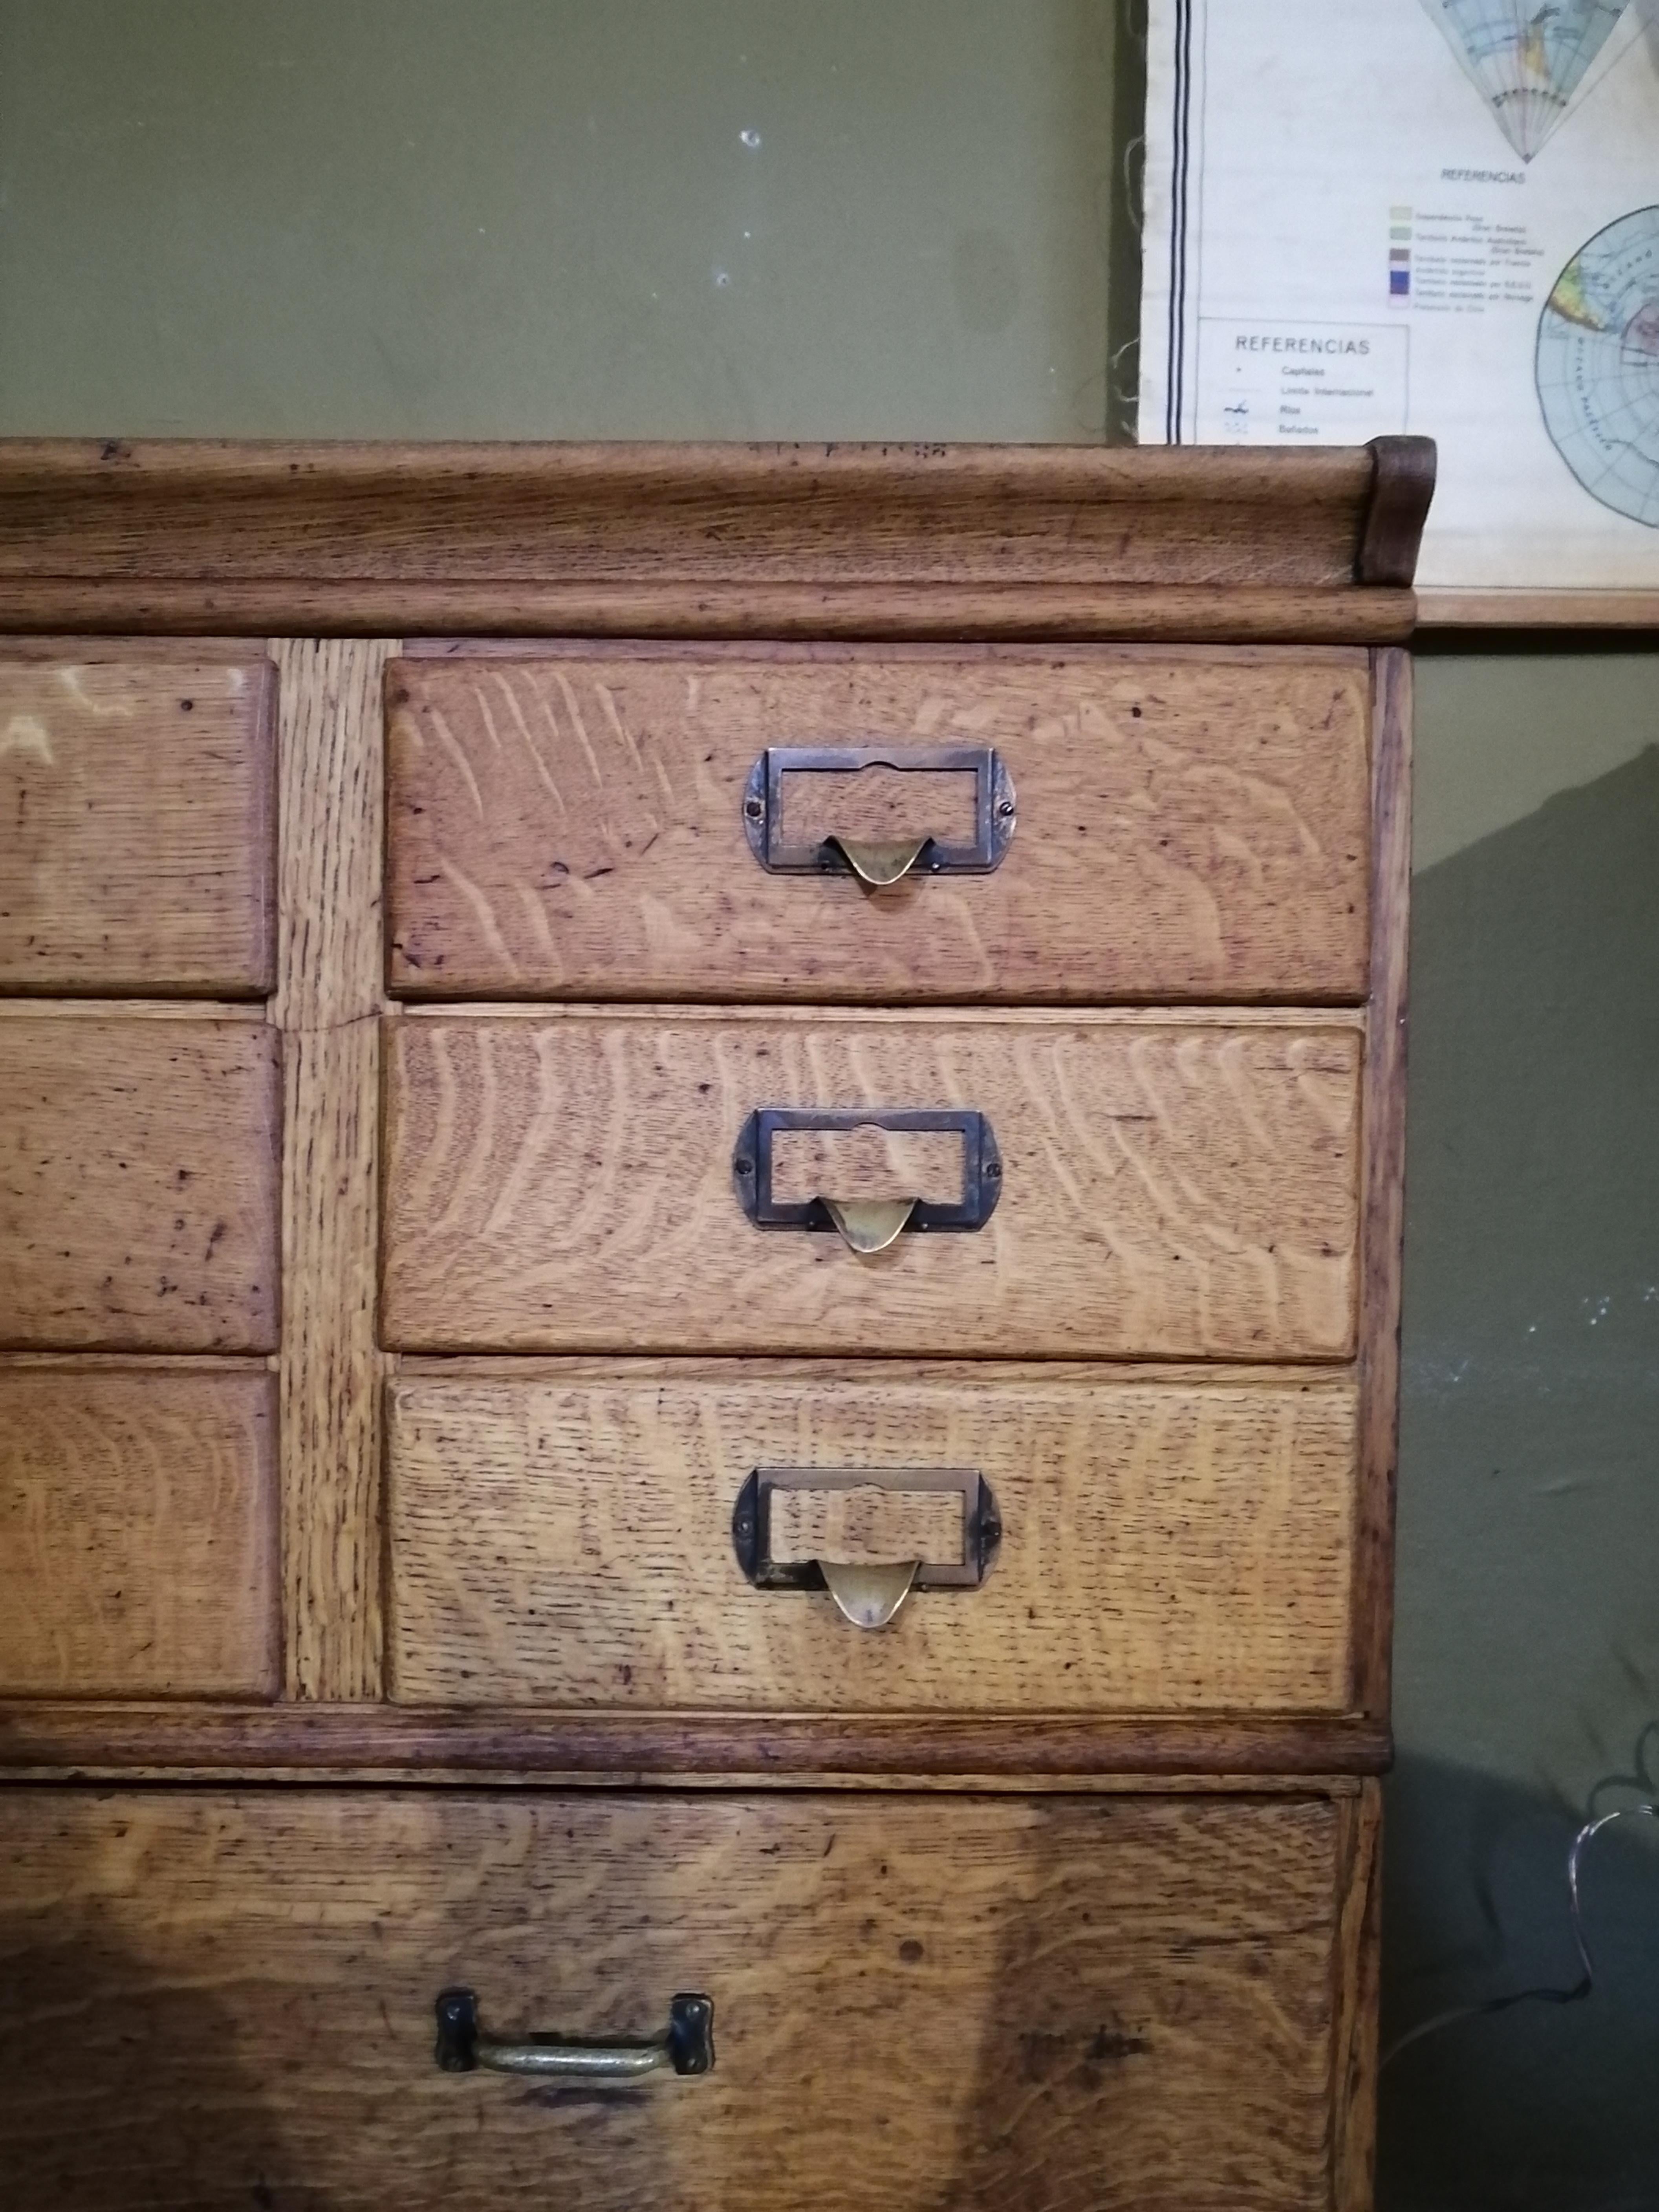 Rare American oak stacking cabinet with drawers by Shaw Walker. The upper body's 9 drawers have brass label handles. The lower body's 4 drawers show regular pulls. It shows the brand sticker on the upper body.